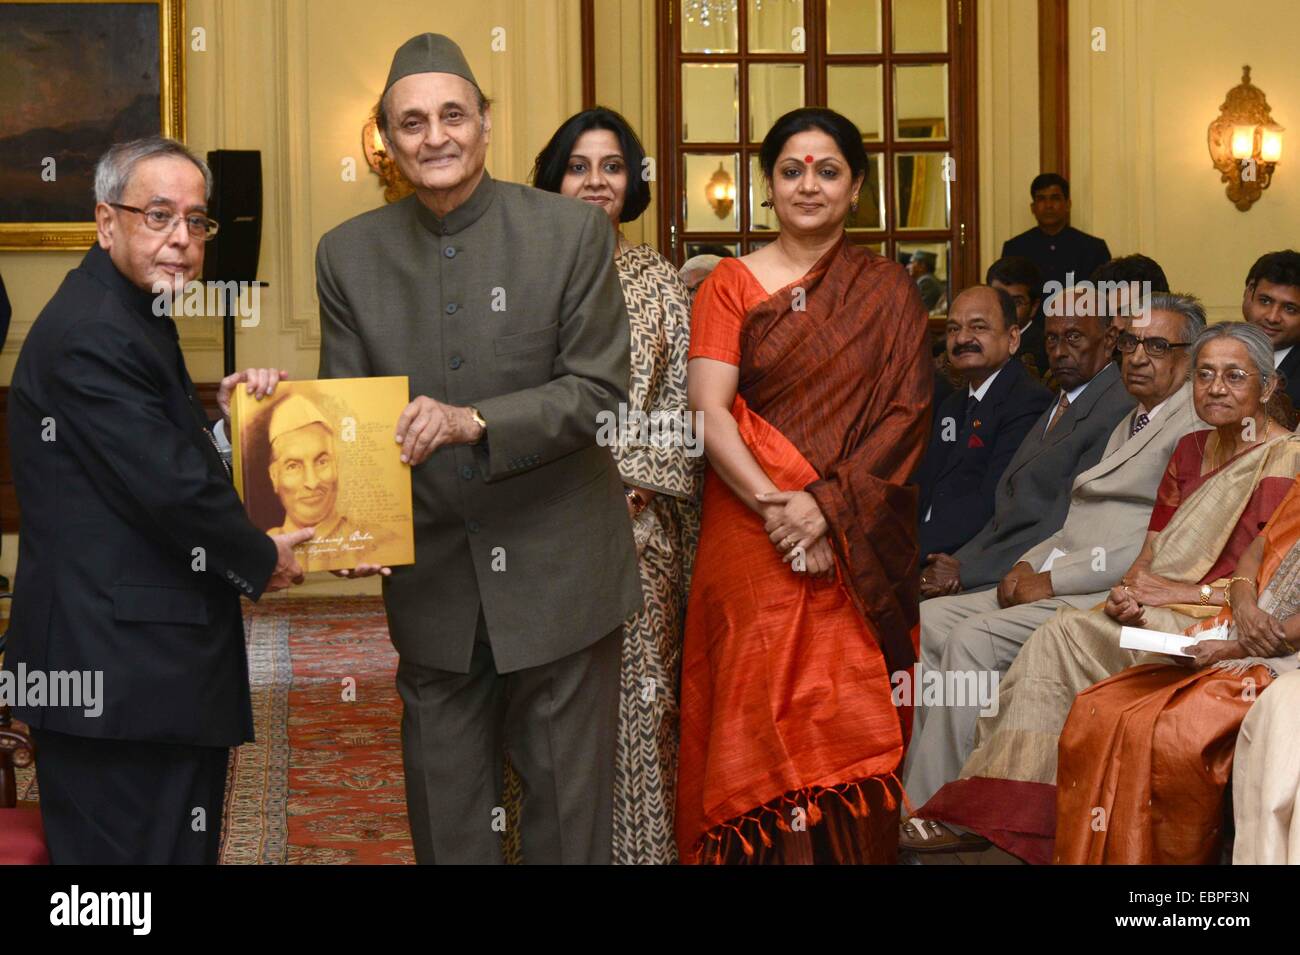 The President of India, Shri Pranab Mukherjee, during the hand-over ceremonry for the first copy of the Coffee Table Book, 'Remembering Baba – Dr. Rajendra Prasad' at Rashtrapati Bhavan. © Bhaskar Mallick/Pacific Press/Alamy Live News Stock Photo